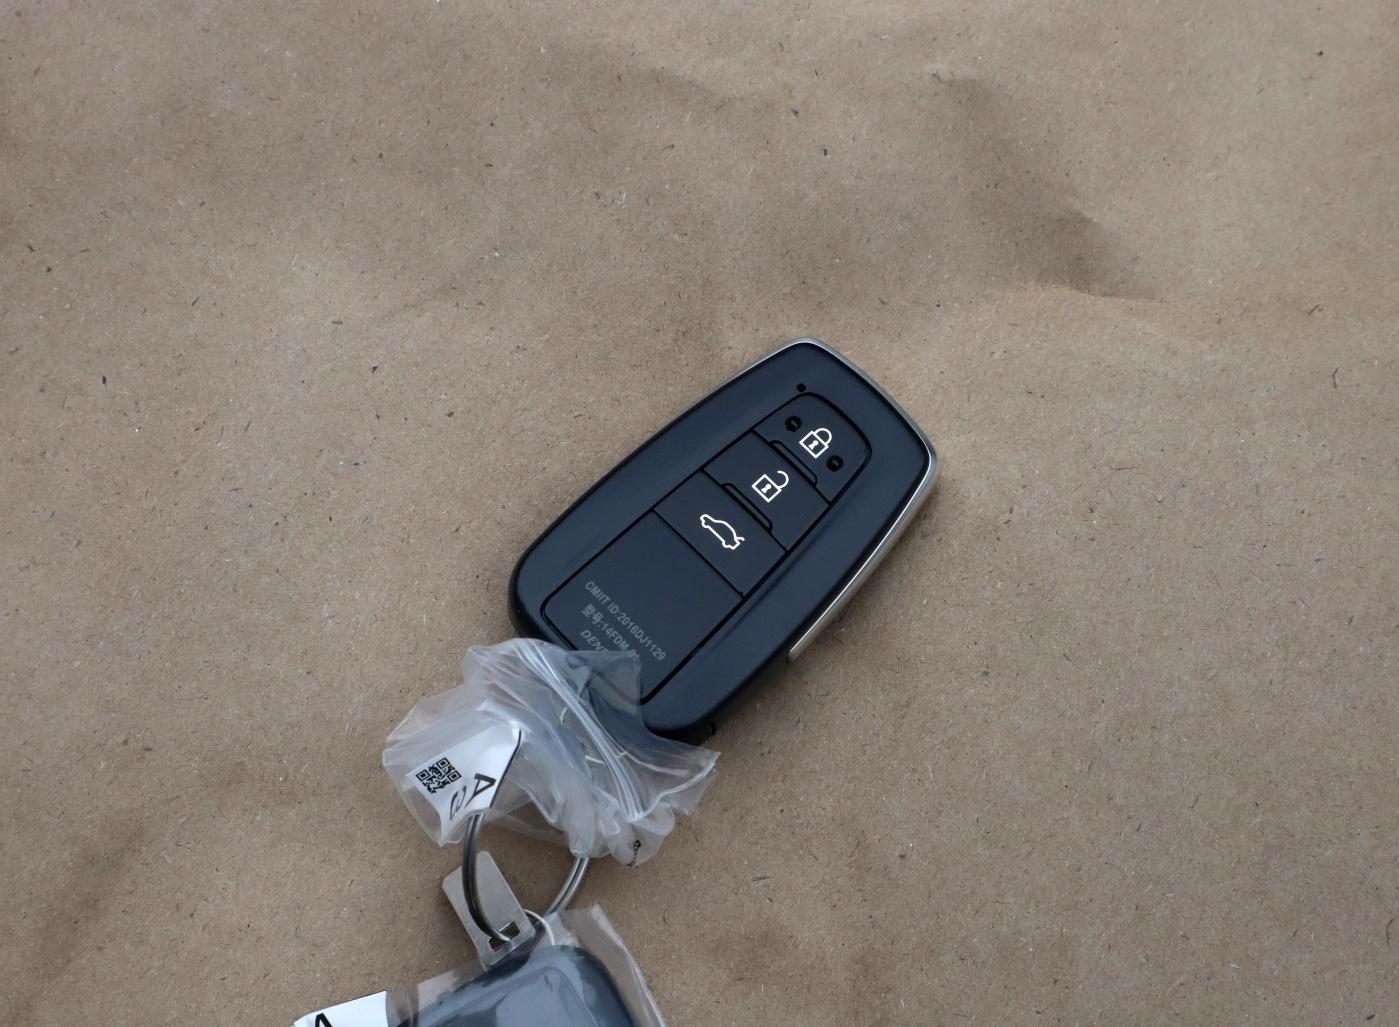 Toyota Camry electric vehicles Car key